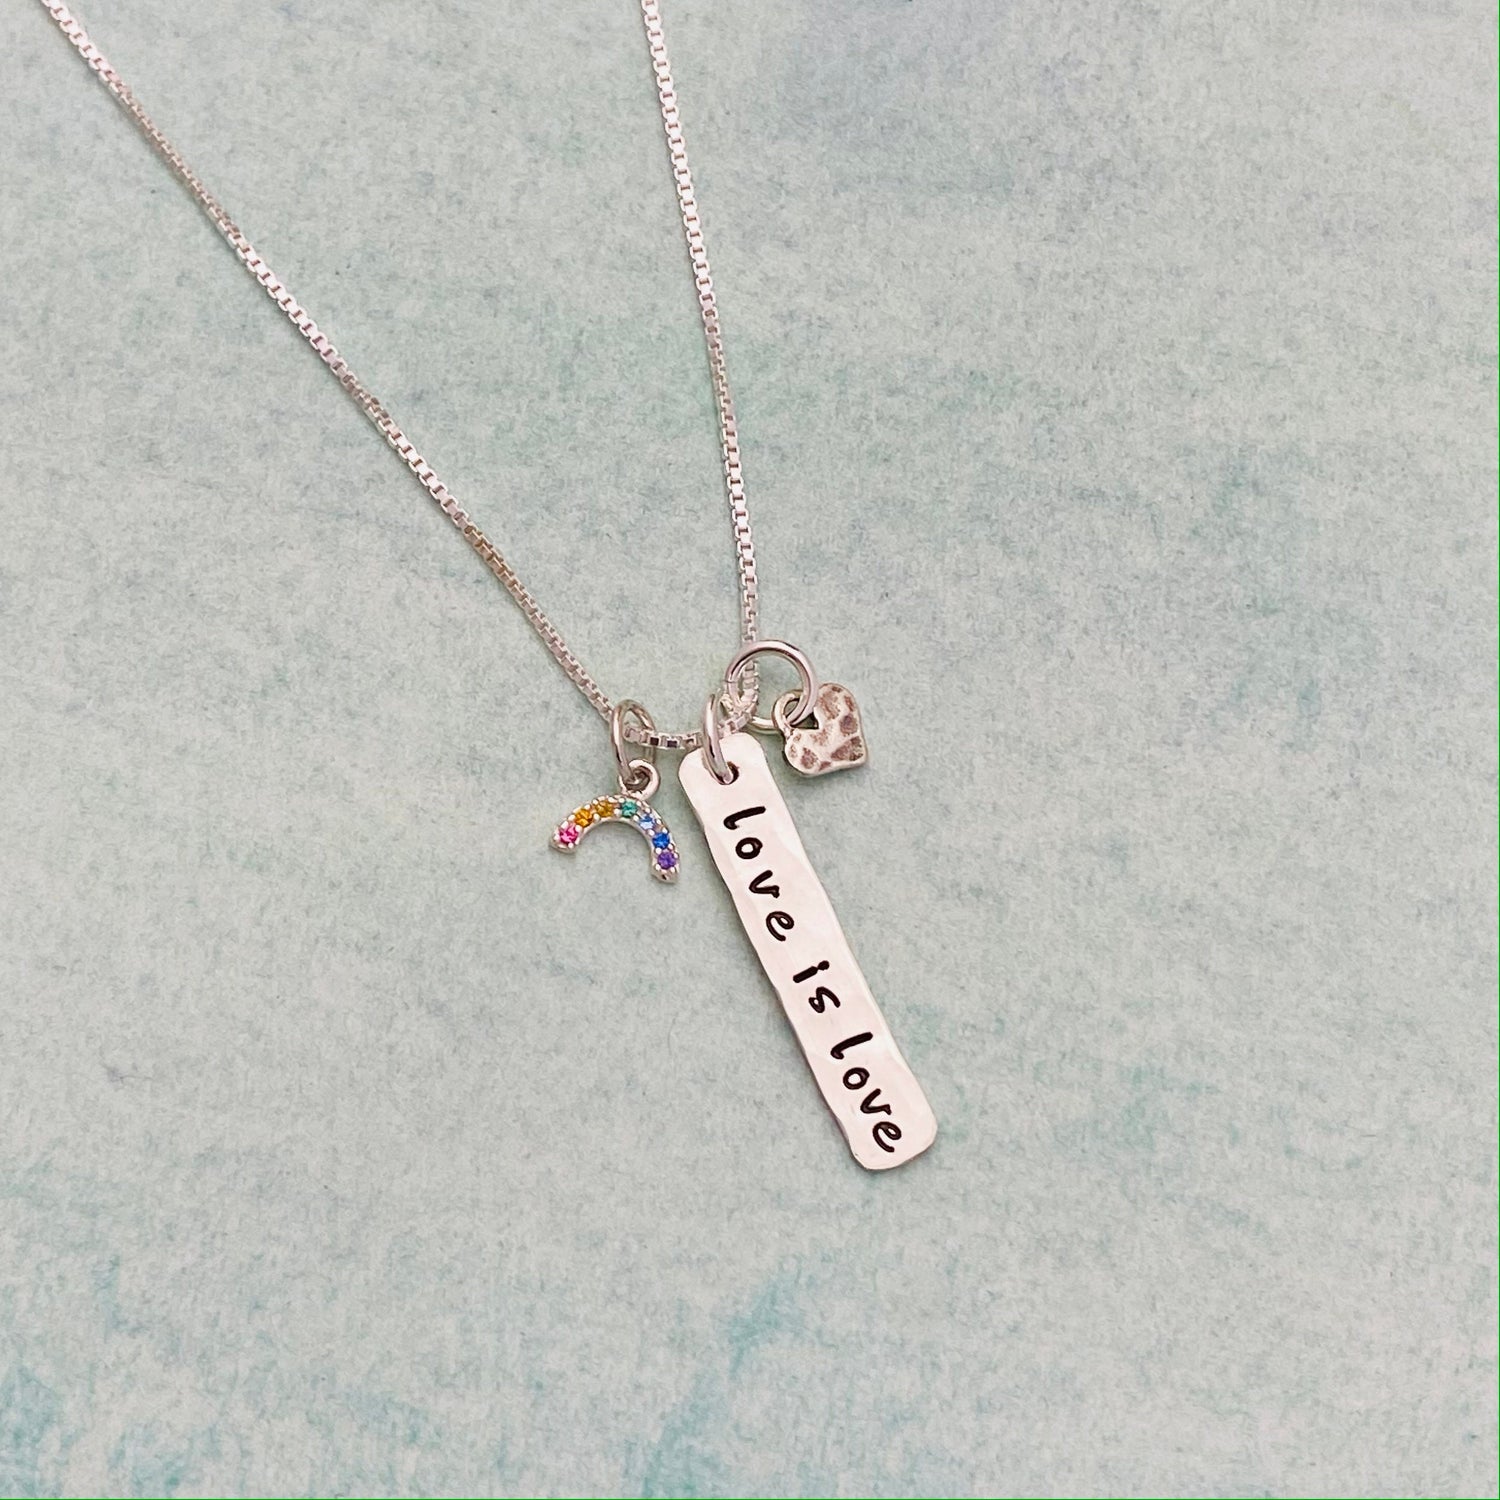 Love is Love Necklace, Cute Rainbow Pride Necklace, Valentine's Day Gift, LGBTQ+ Jewelry, Tiny Hand Stamped Charm Necklace, Rainbow Necklace